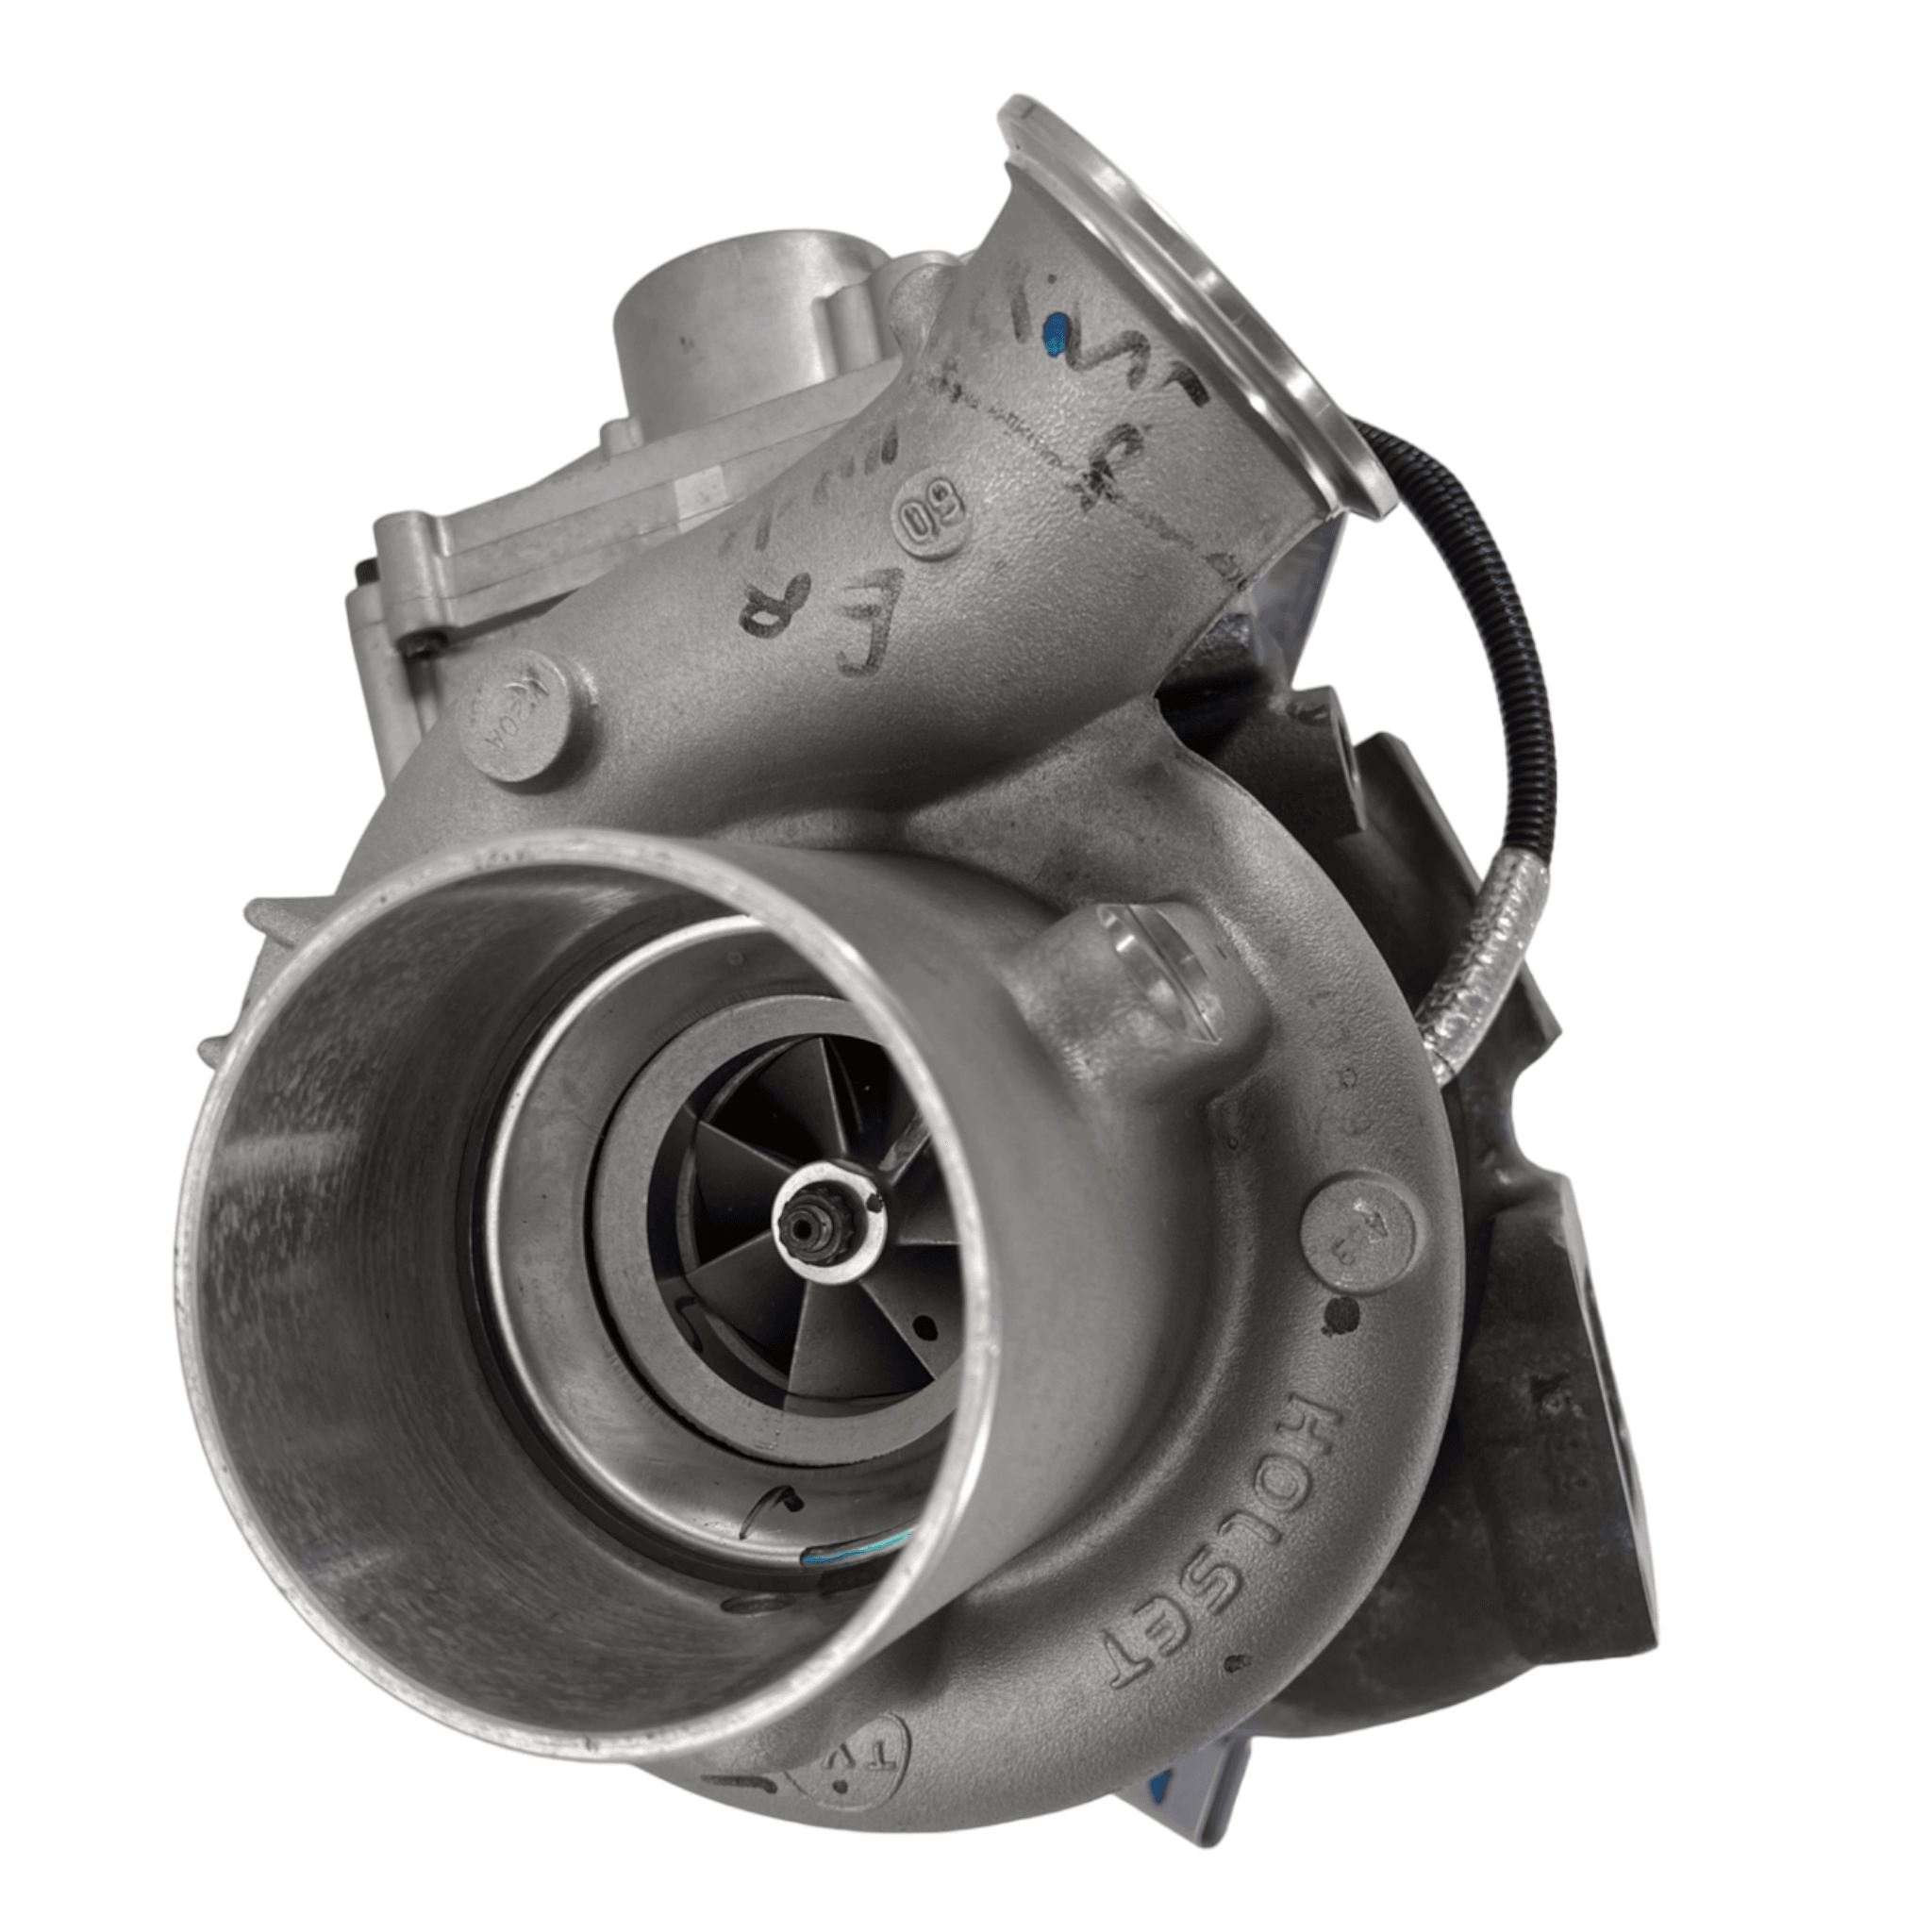 4955539 Genuine Cummins® He351Ve Turbocharger Kit With Actuator For Isb 6.7L - ADVANCED TRUCK PARTS